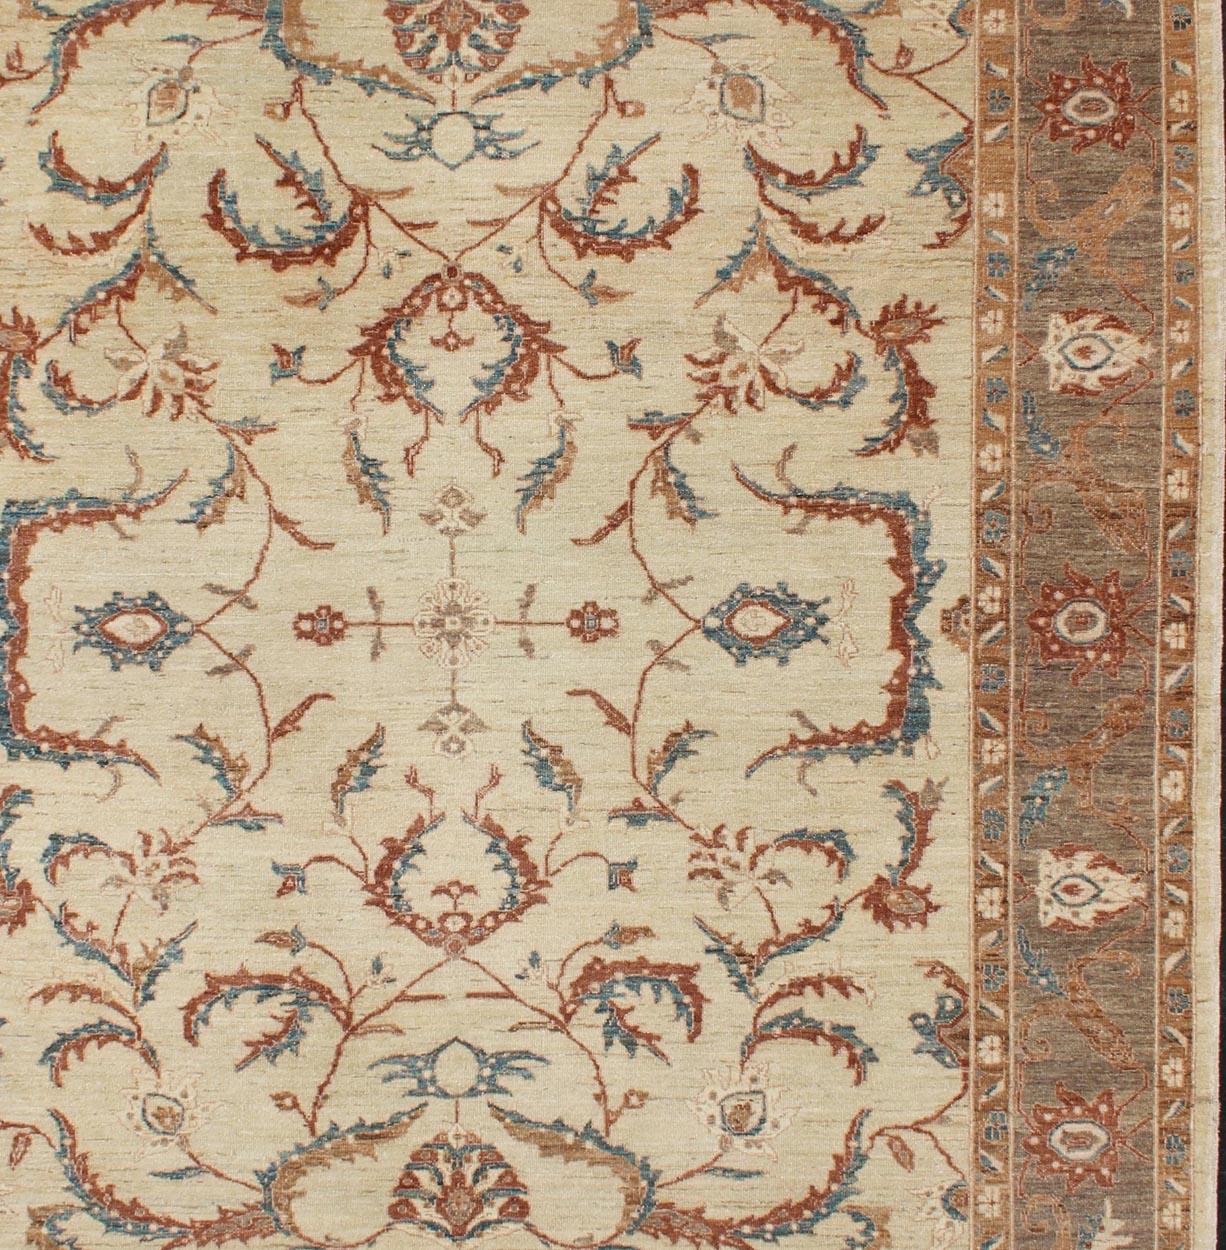 Tabriz design from Afghanistan with all-over floral design in taupe and cream. Keivan Woven Arts / rug DSP-BC11593, country of origin / type: Afghanistan / Tabriz, late 20th century
Measures: 8'1 x 9'8.
This with a sophisticated, all-over design